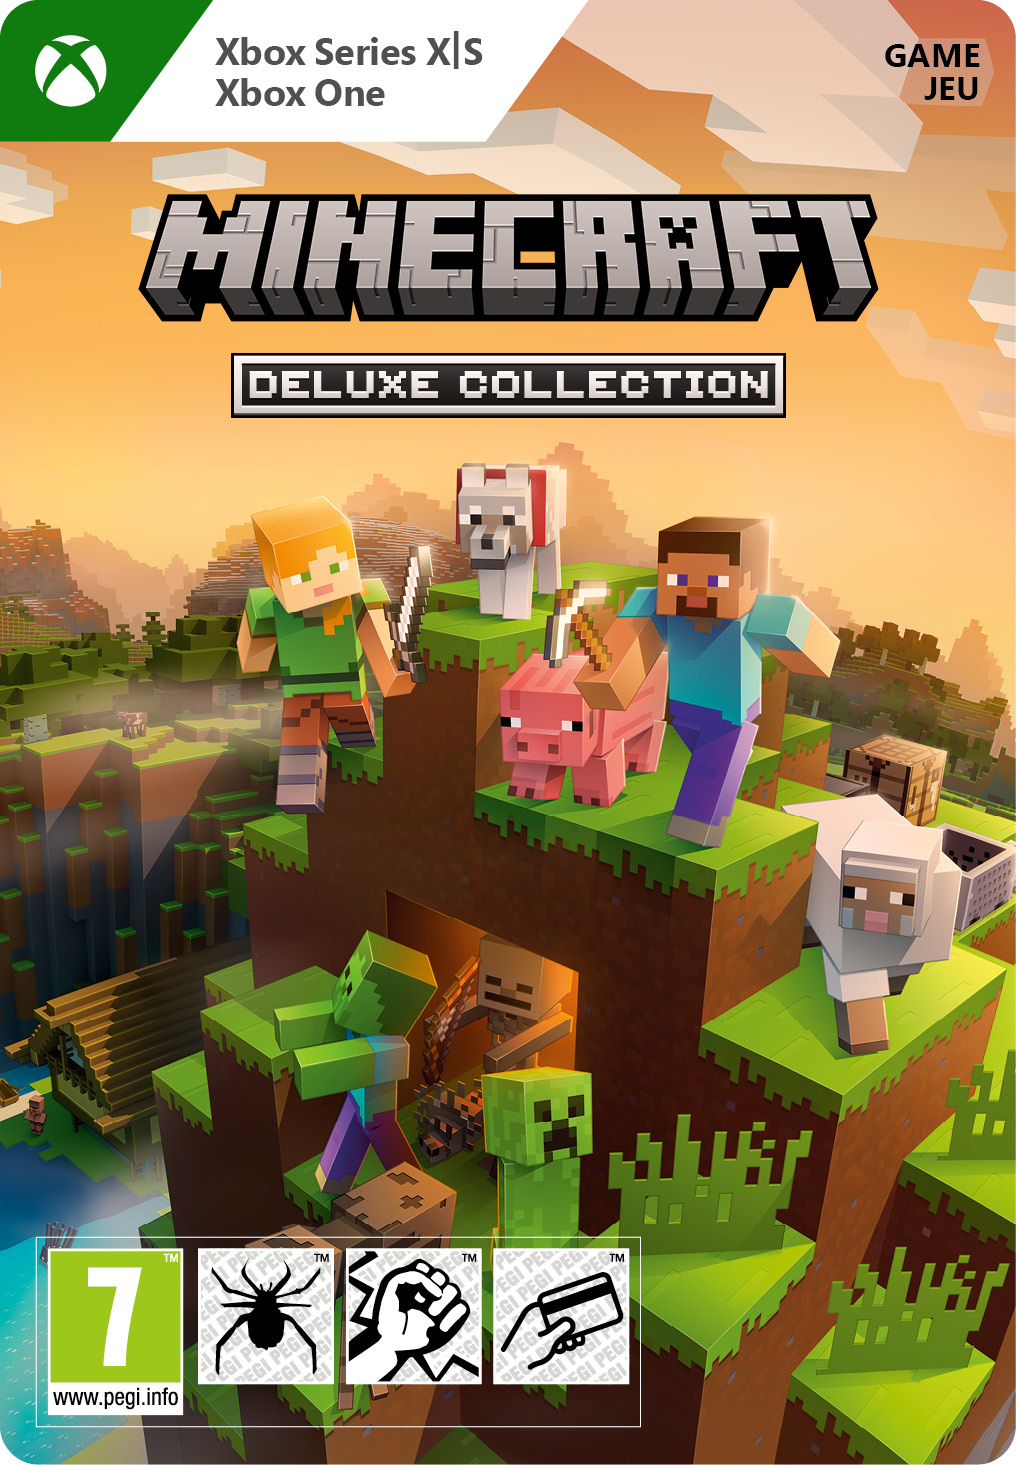 Minecraft Legends Deluxe Collection - Xbox Series X|S/One - 15th Anniversary Sale